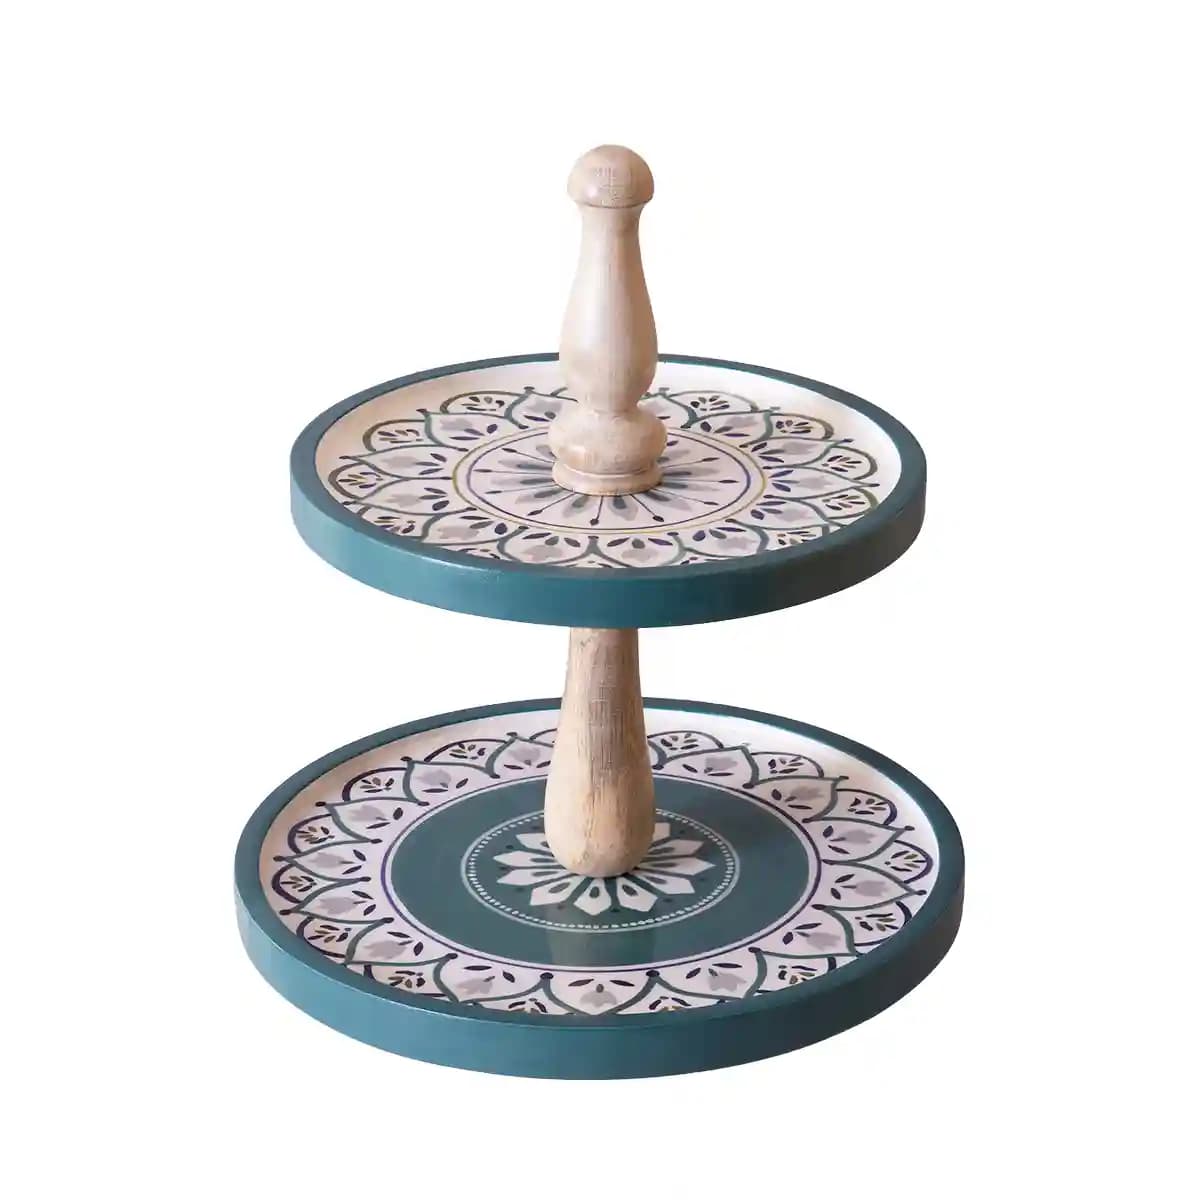 Handpainted Wooden 2 Tier Cake Stand